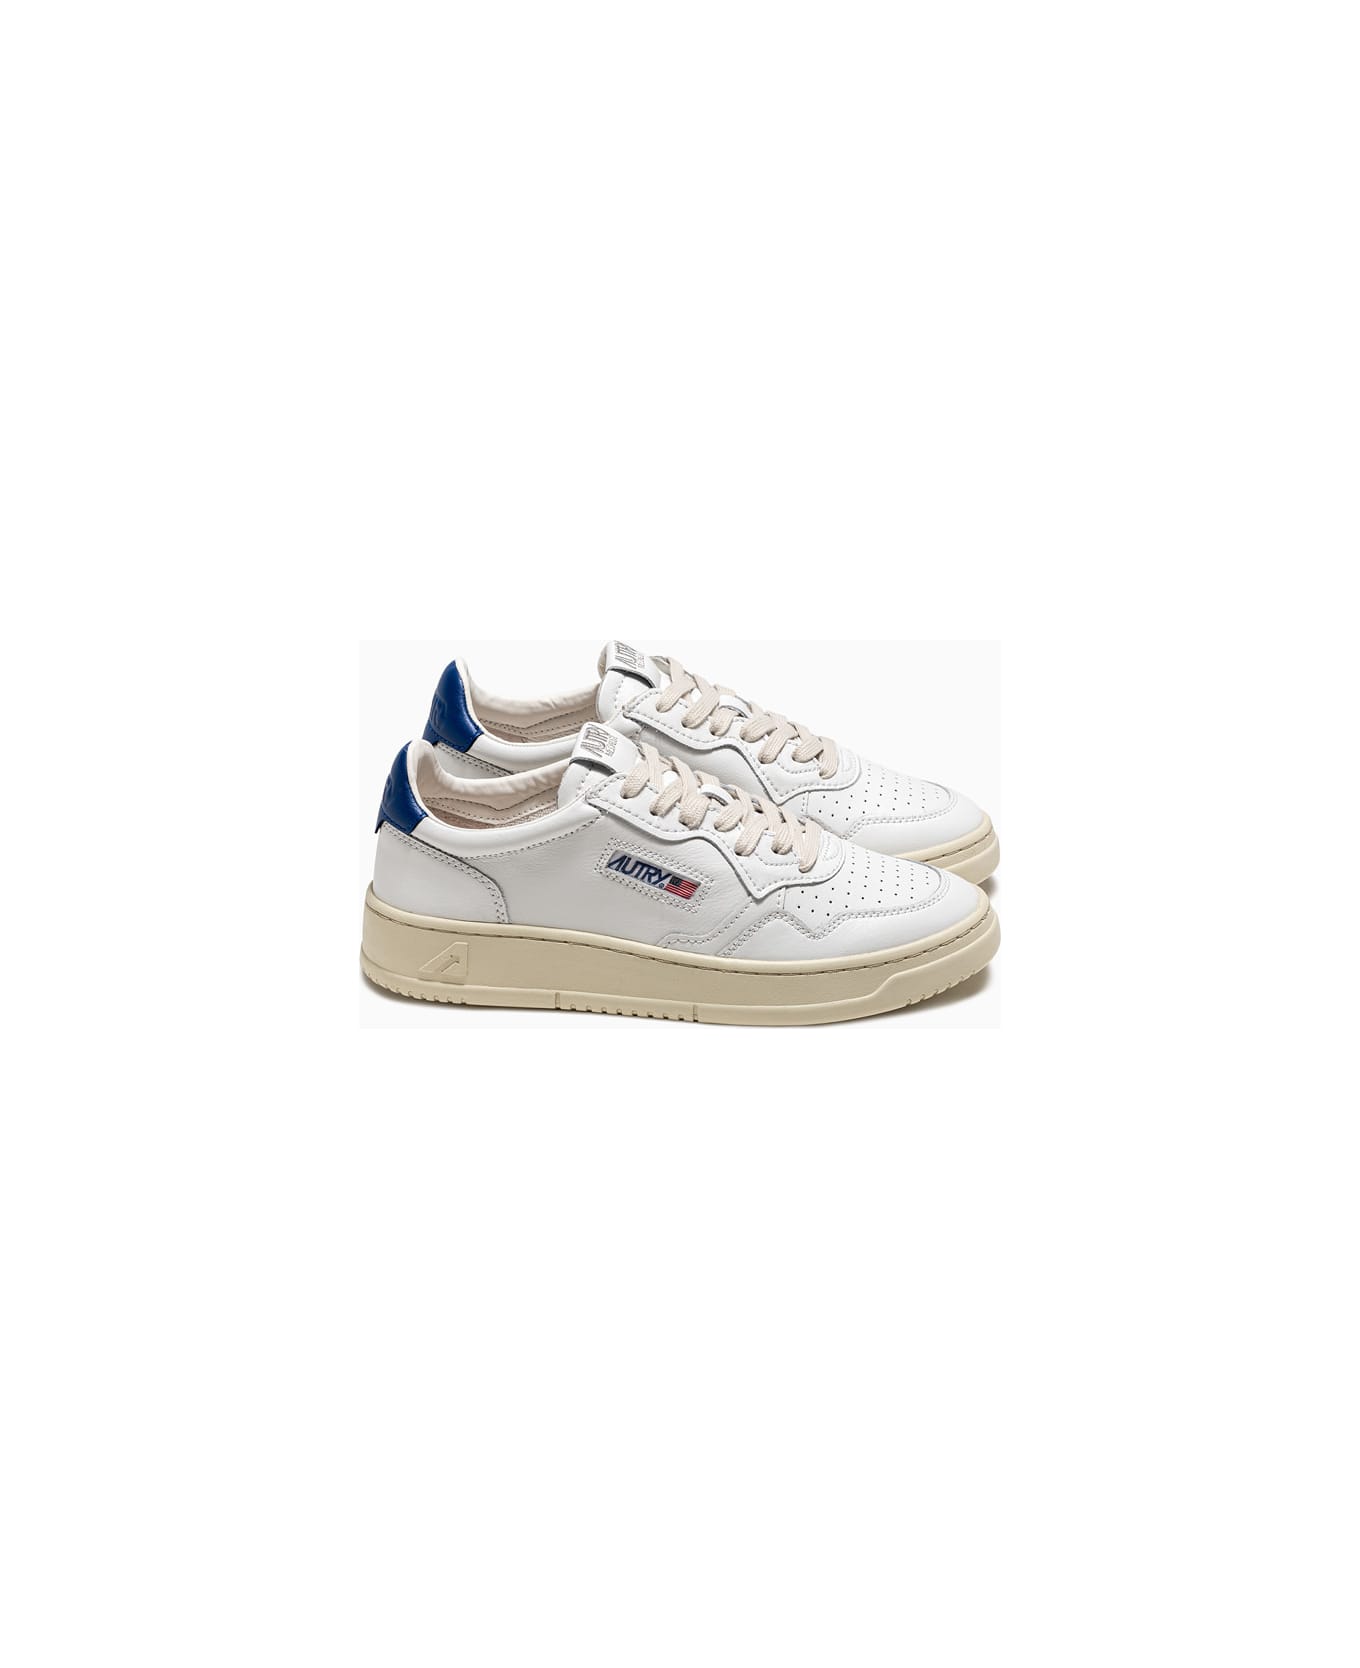 Autry Low Aulum Ll12 Sneakers - White スニーカー